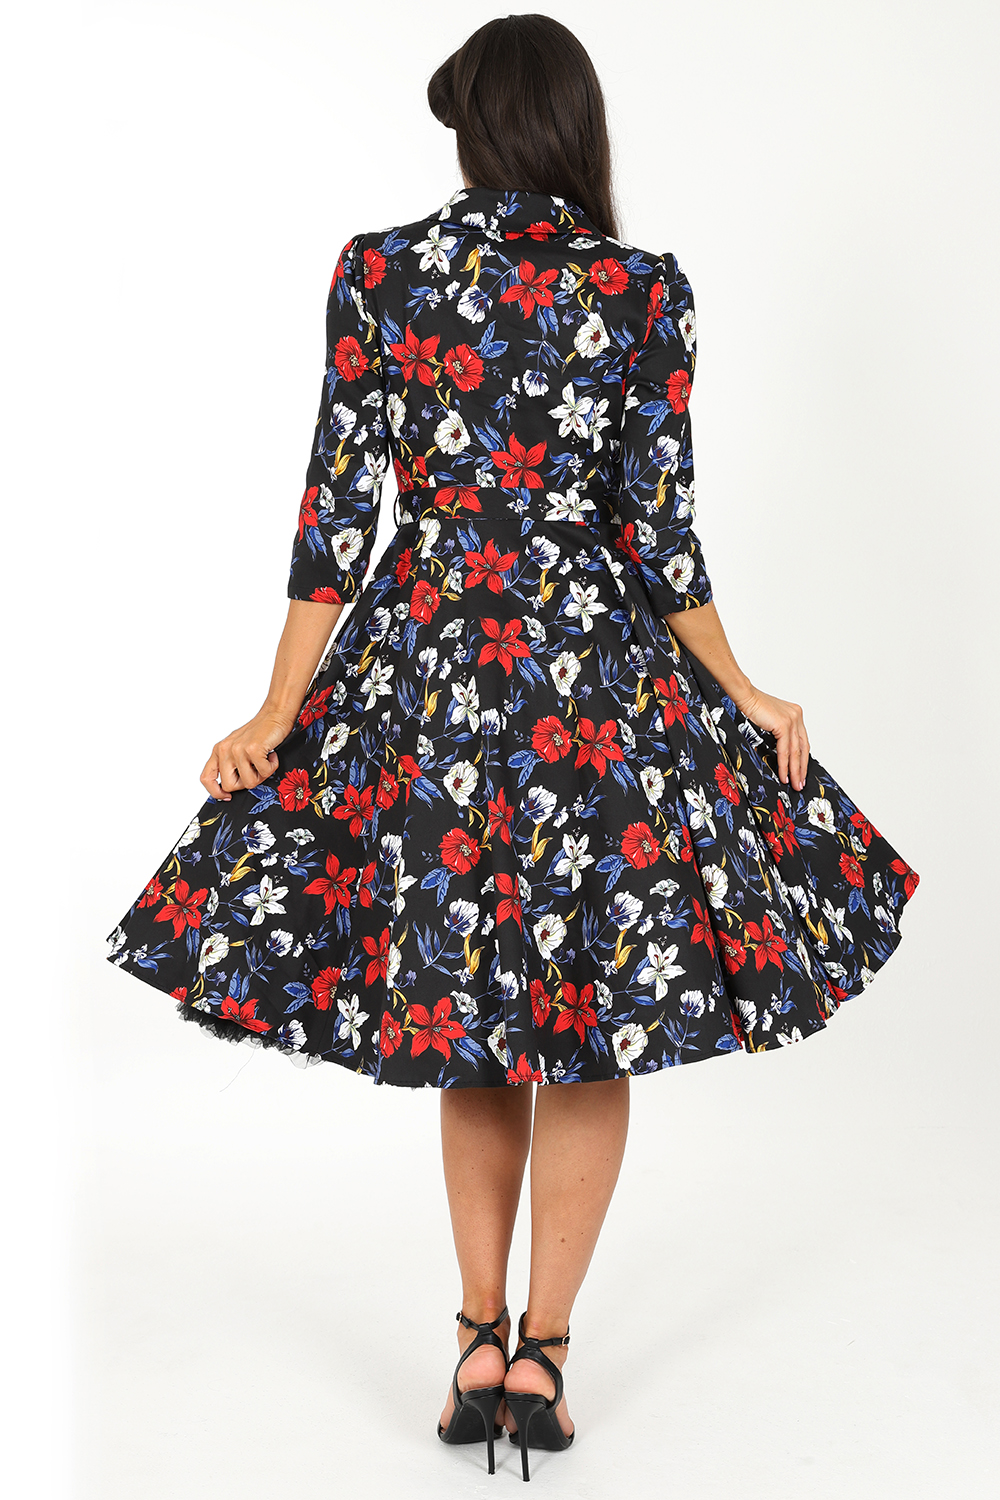 Milly Floral Swing Dress